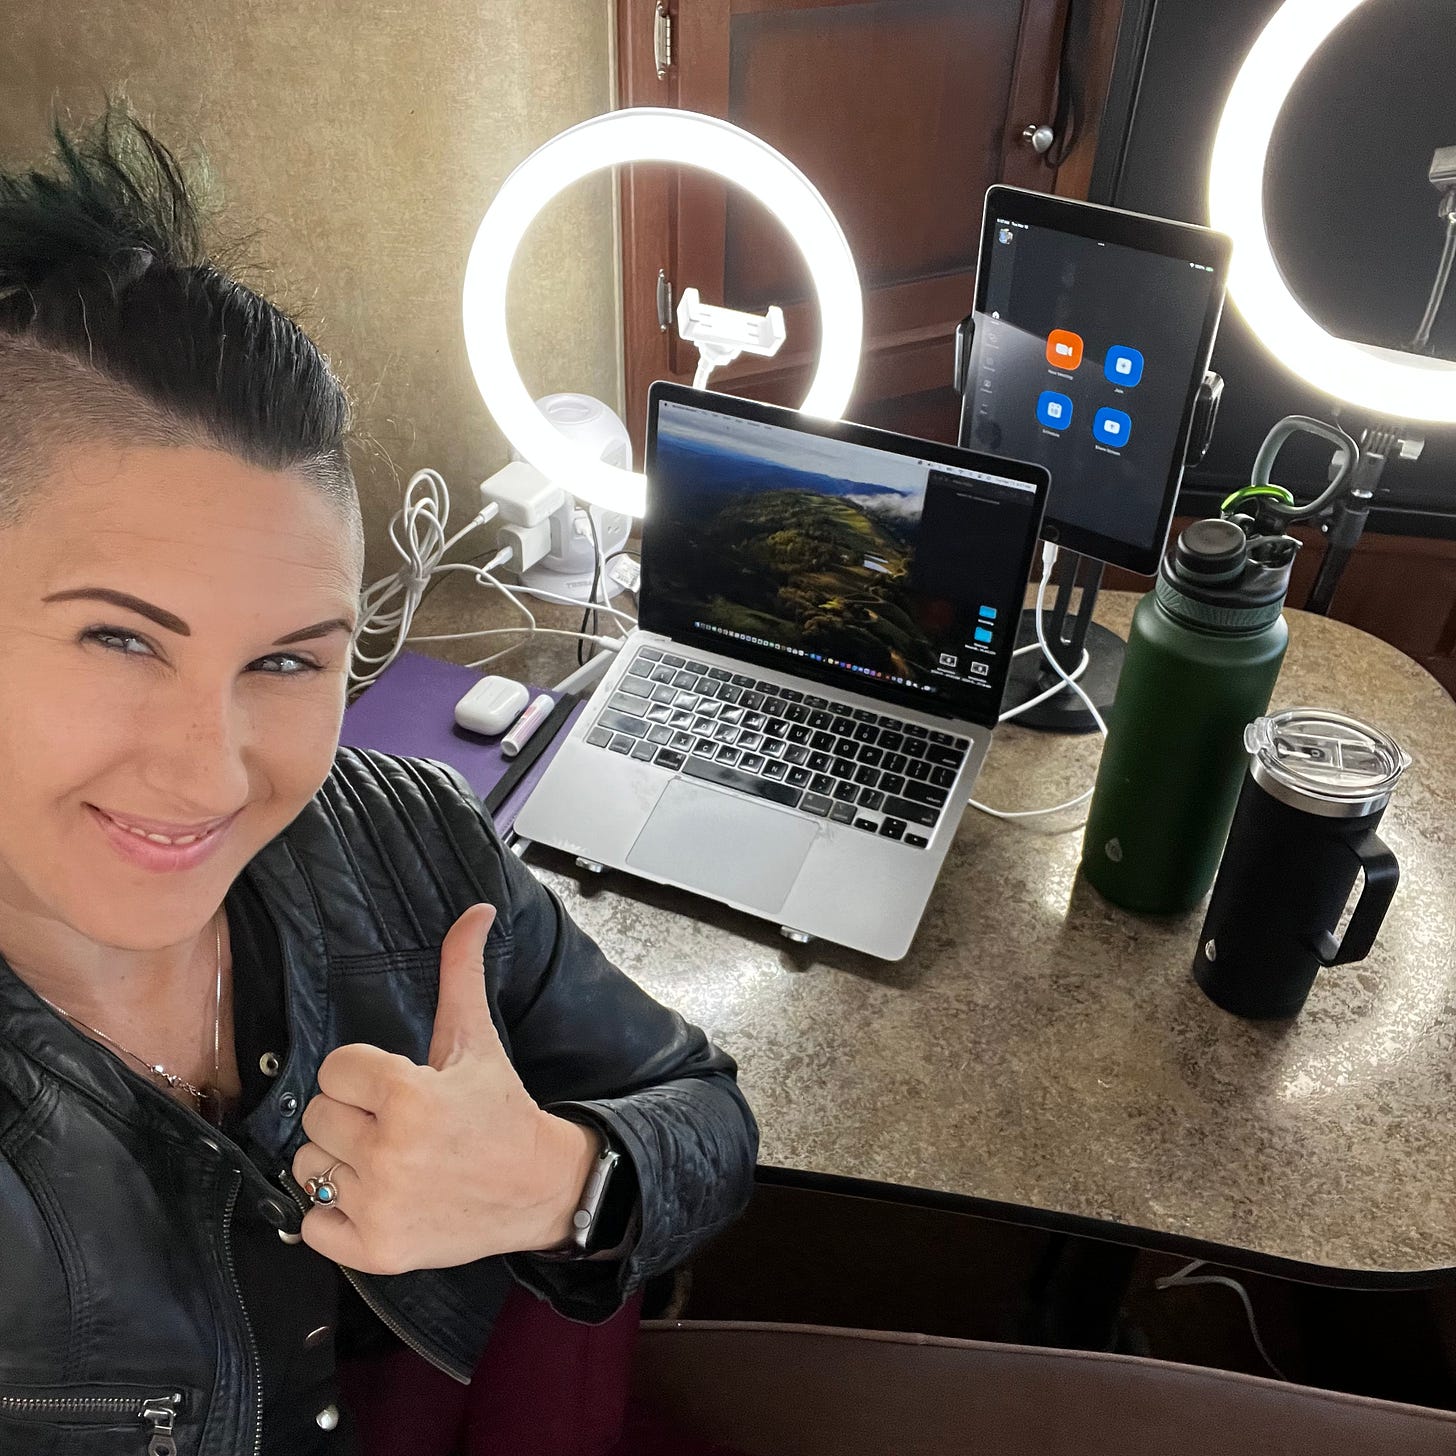  Lyric Rivera, giving a thumbs up. They are wearing a black leather jacket and black top, sitting in their RV, as they sit behind their laptop, iPad, and other devices for broadcasting live to the world. 